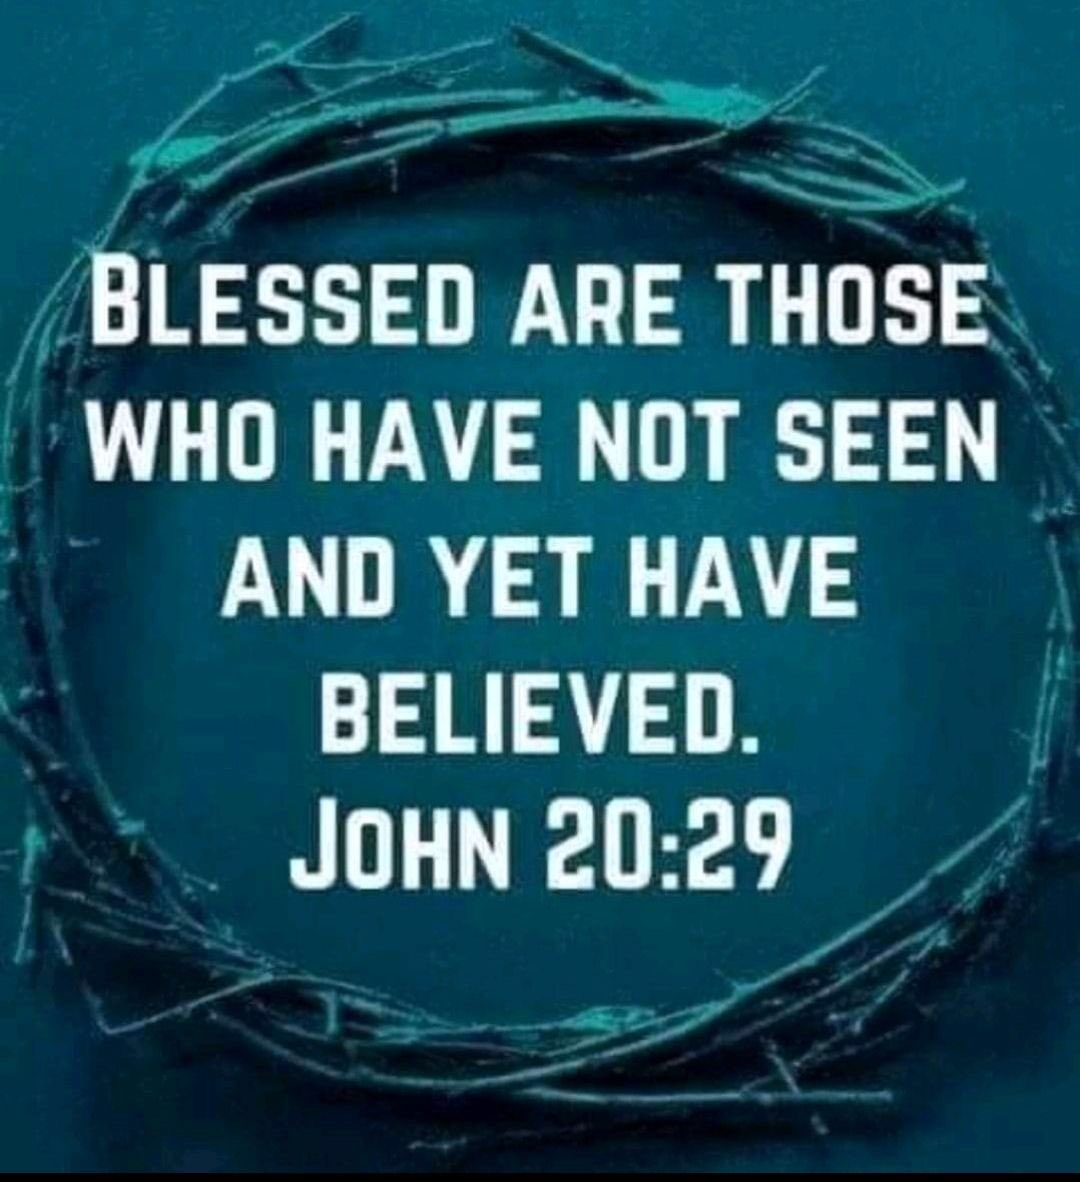 Blessed Are Those Who Have Not Seen And Yet Have Believed.🙏John 20:29 @1Nicdar @EL4USA @CJSzx12 @HPY2KW @45Gigi24 @TwinsBus @Bert7058 @Astud987 @gildea_leo @SULLY10X @locoashes @bdonesem @Rammie24 @SirFlyzalot @Robitysom @roybearcat @TJLakers01 @3030bubba…